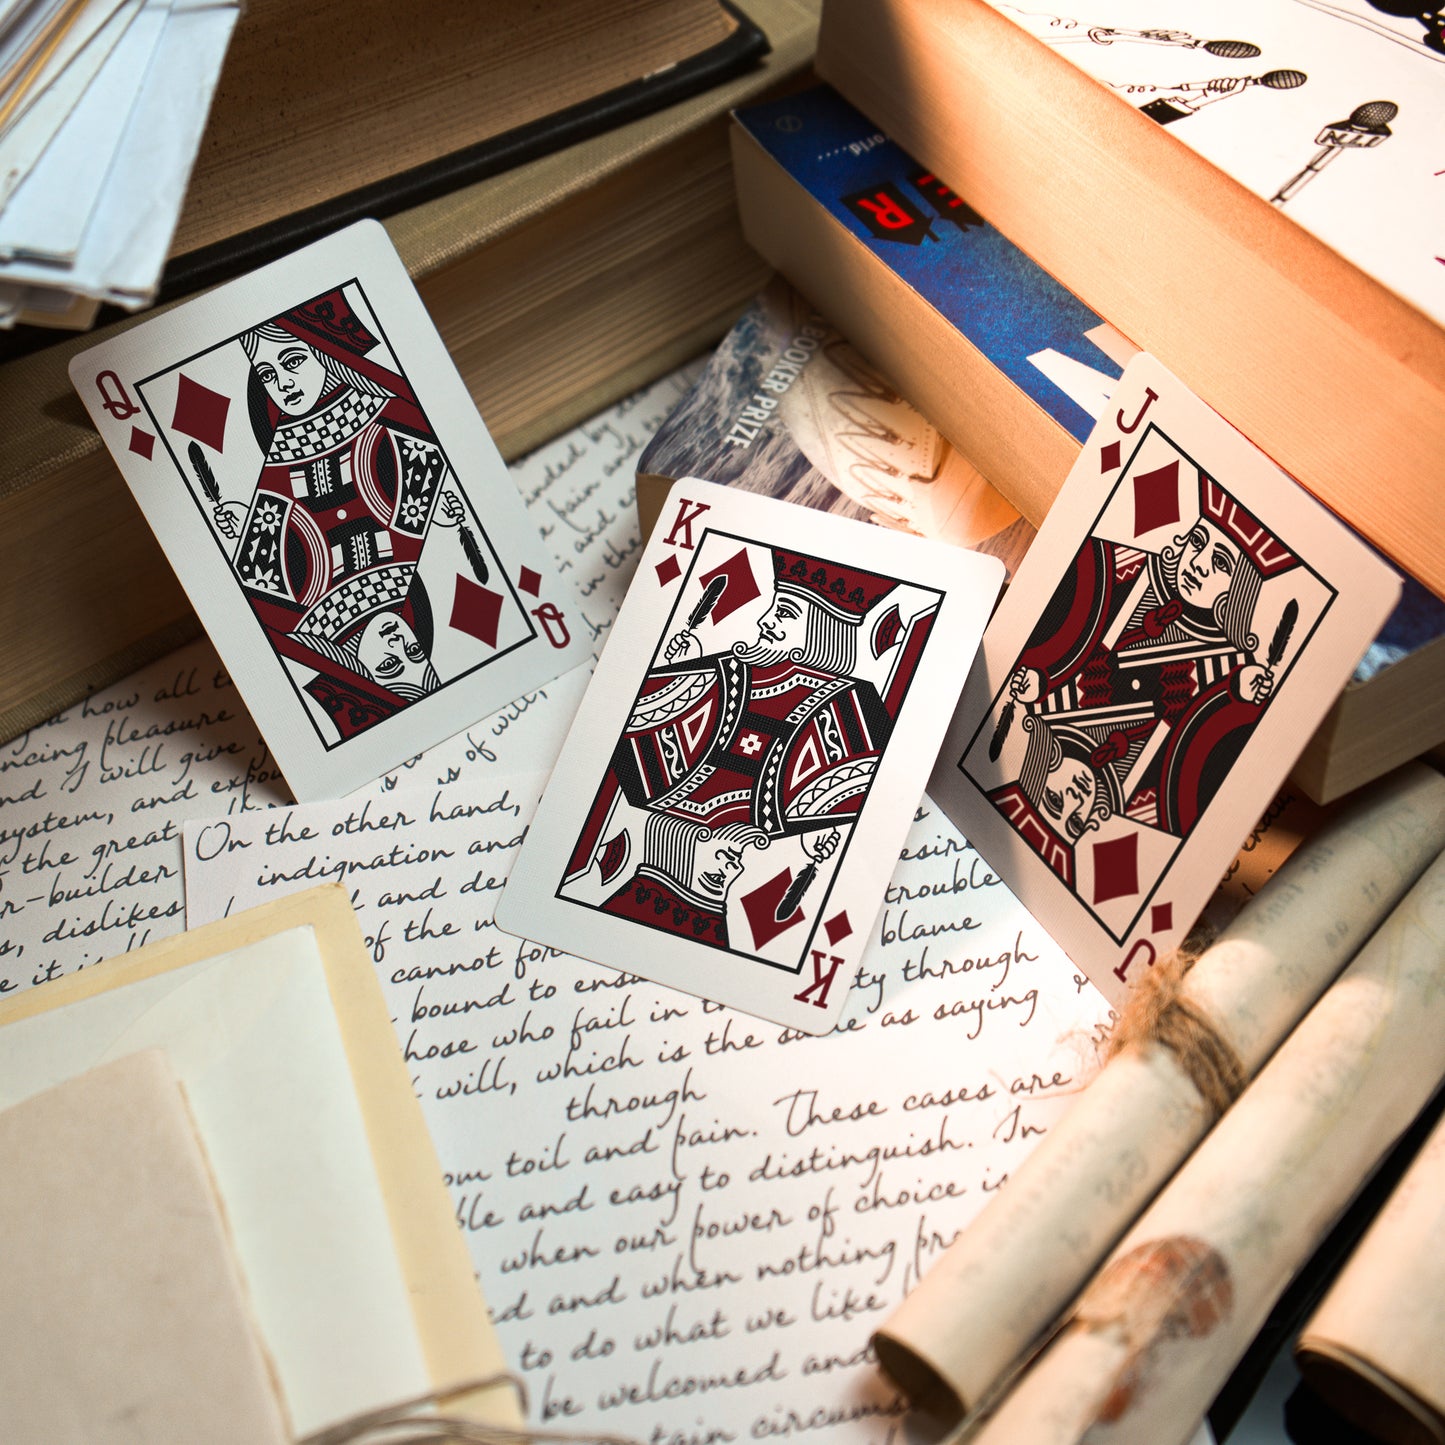 Chapter Two Playing Cards